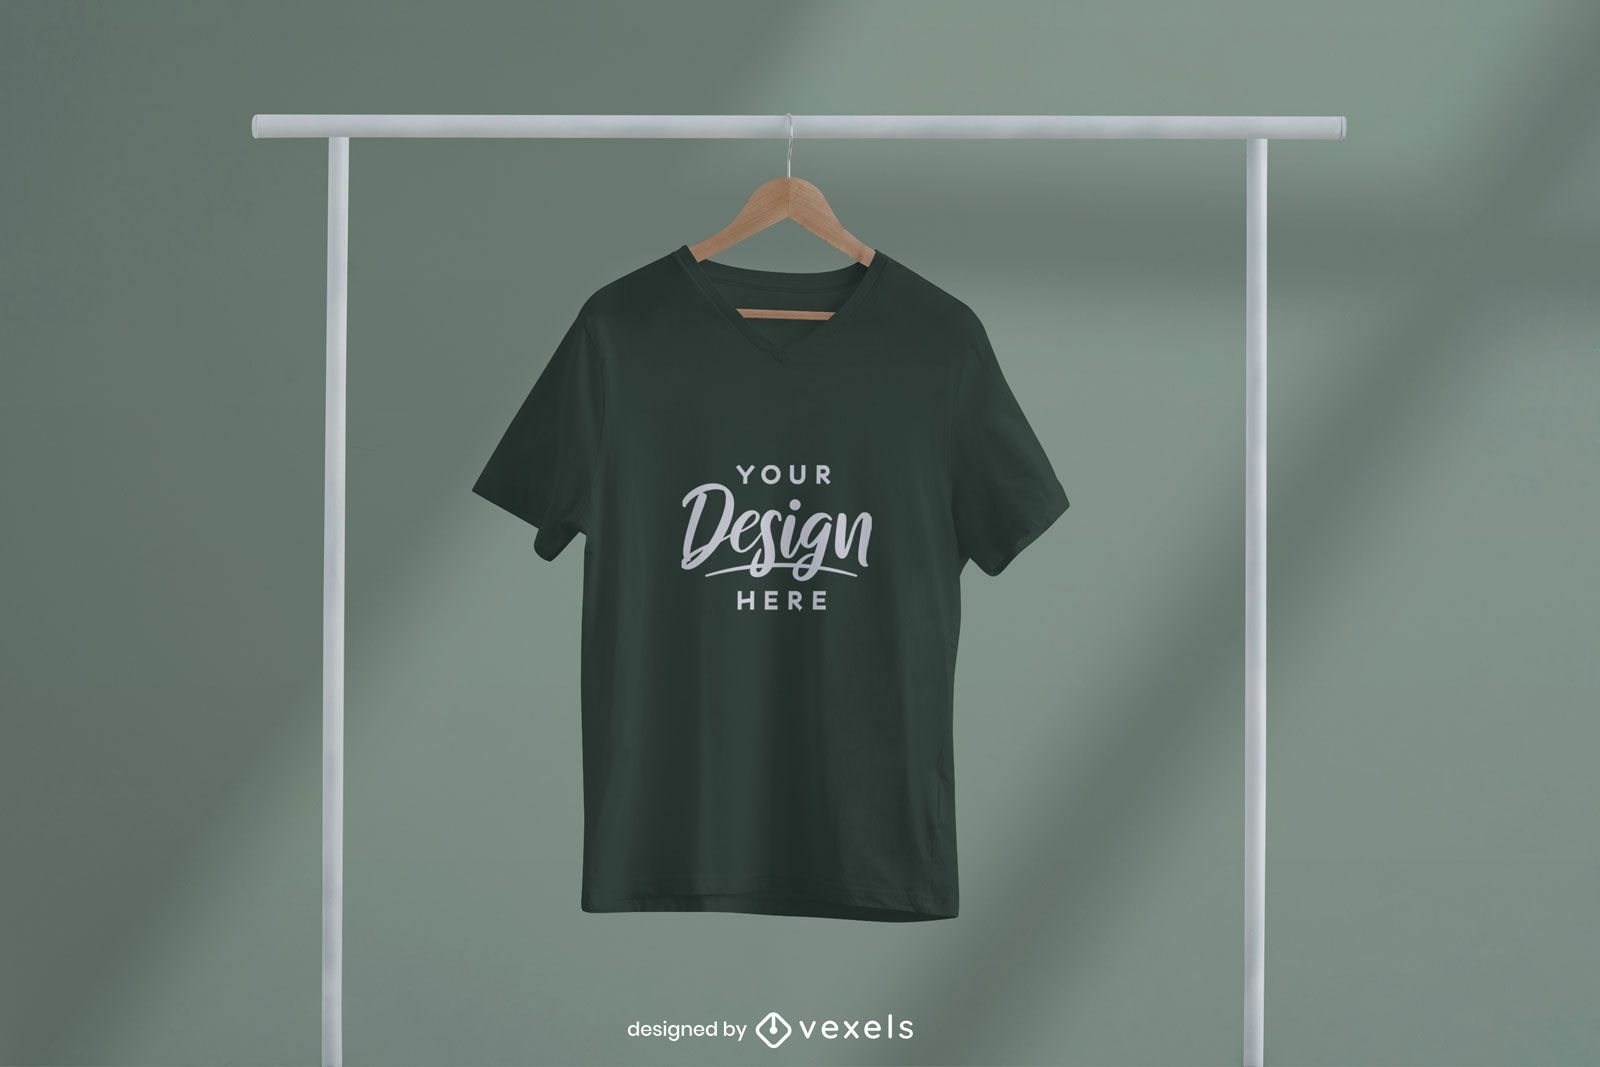 Green t-shirt in clothes hanger mockup